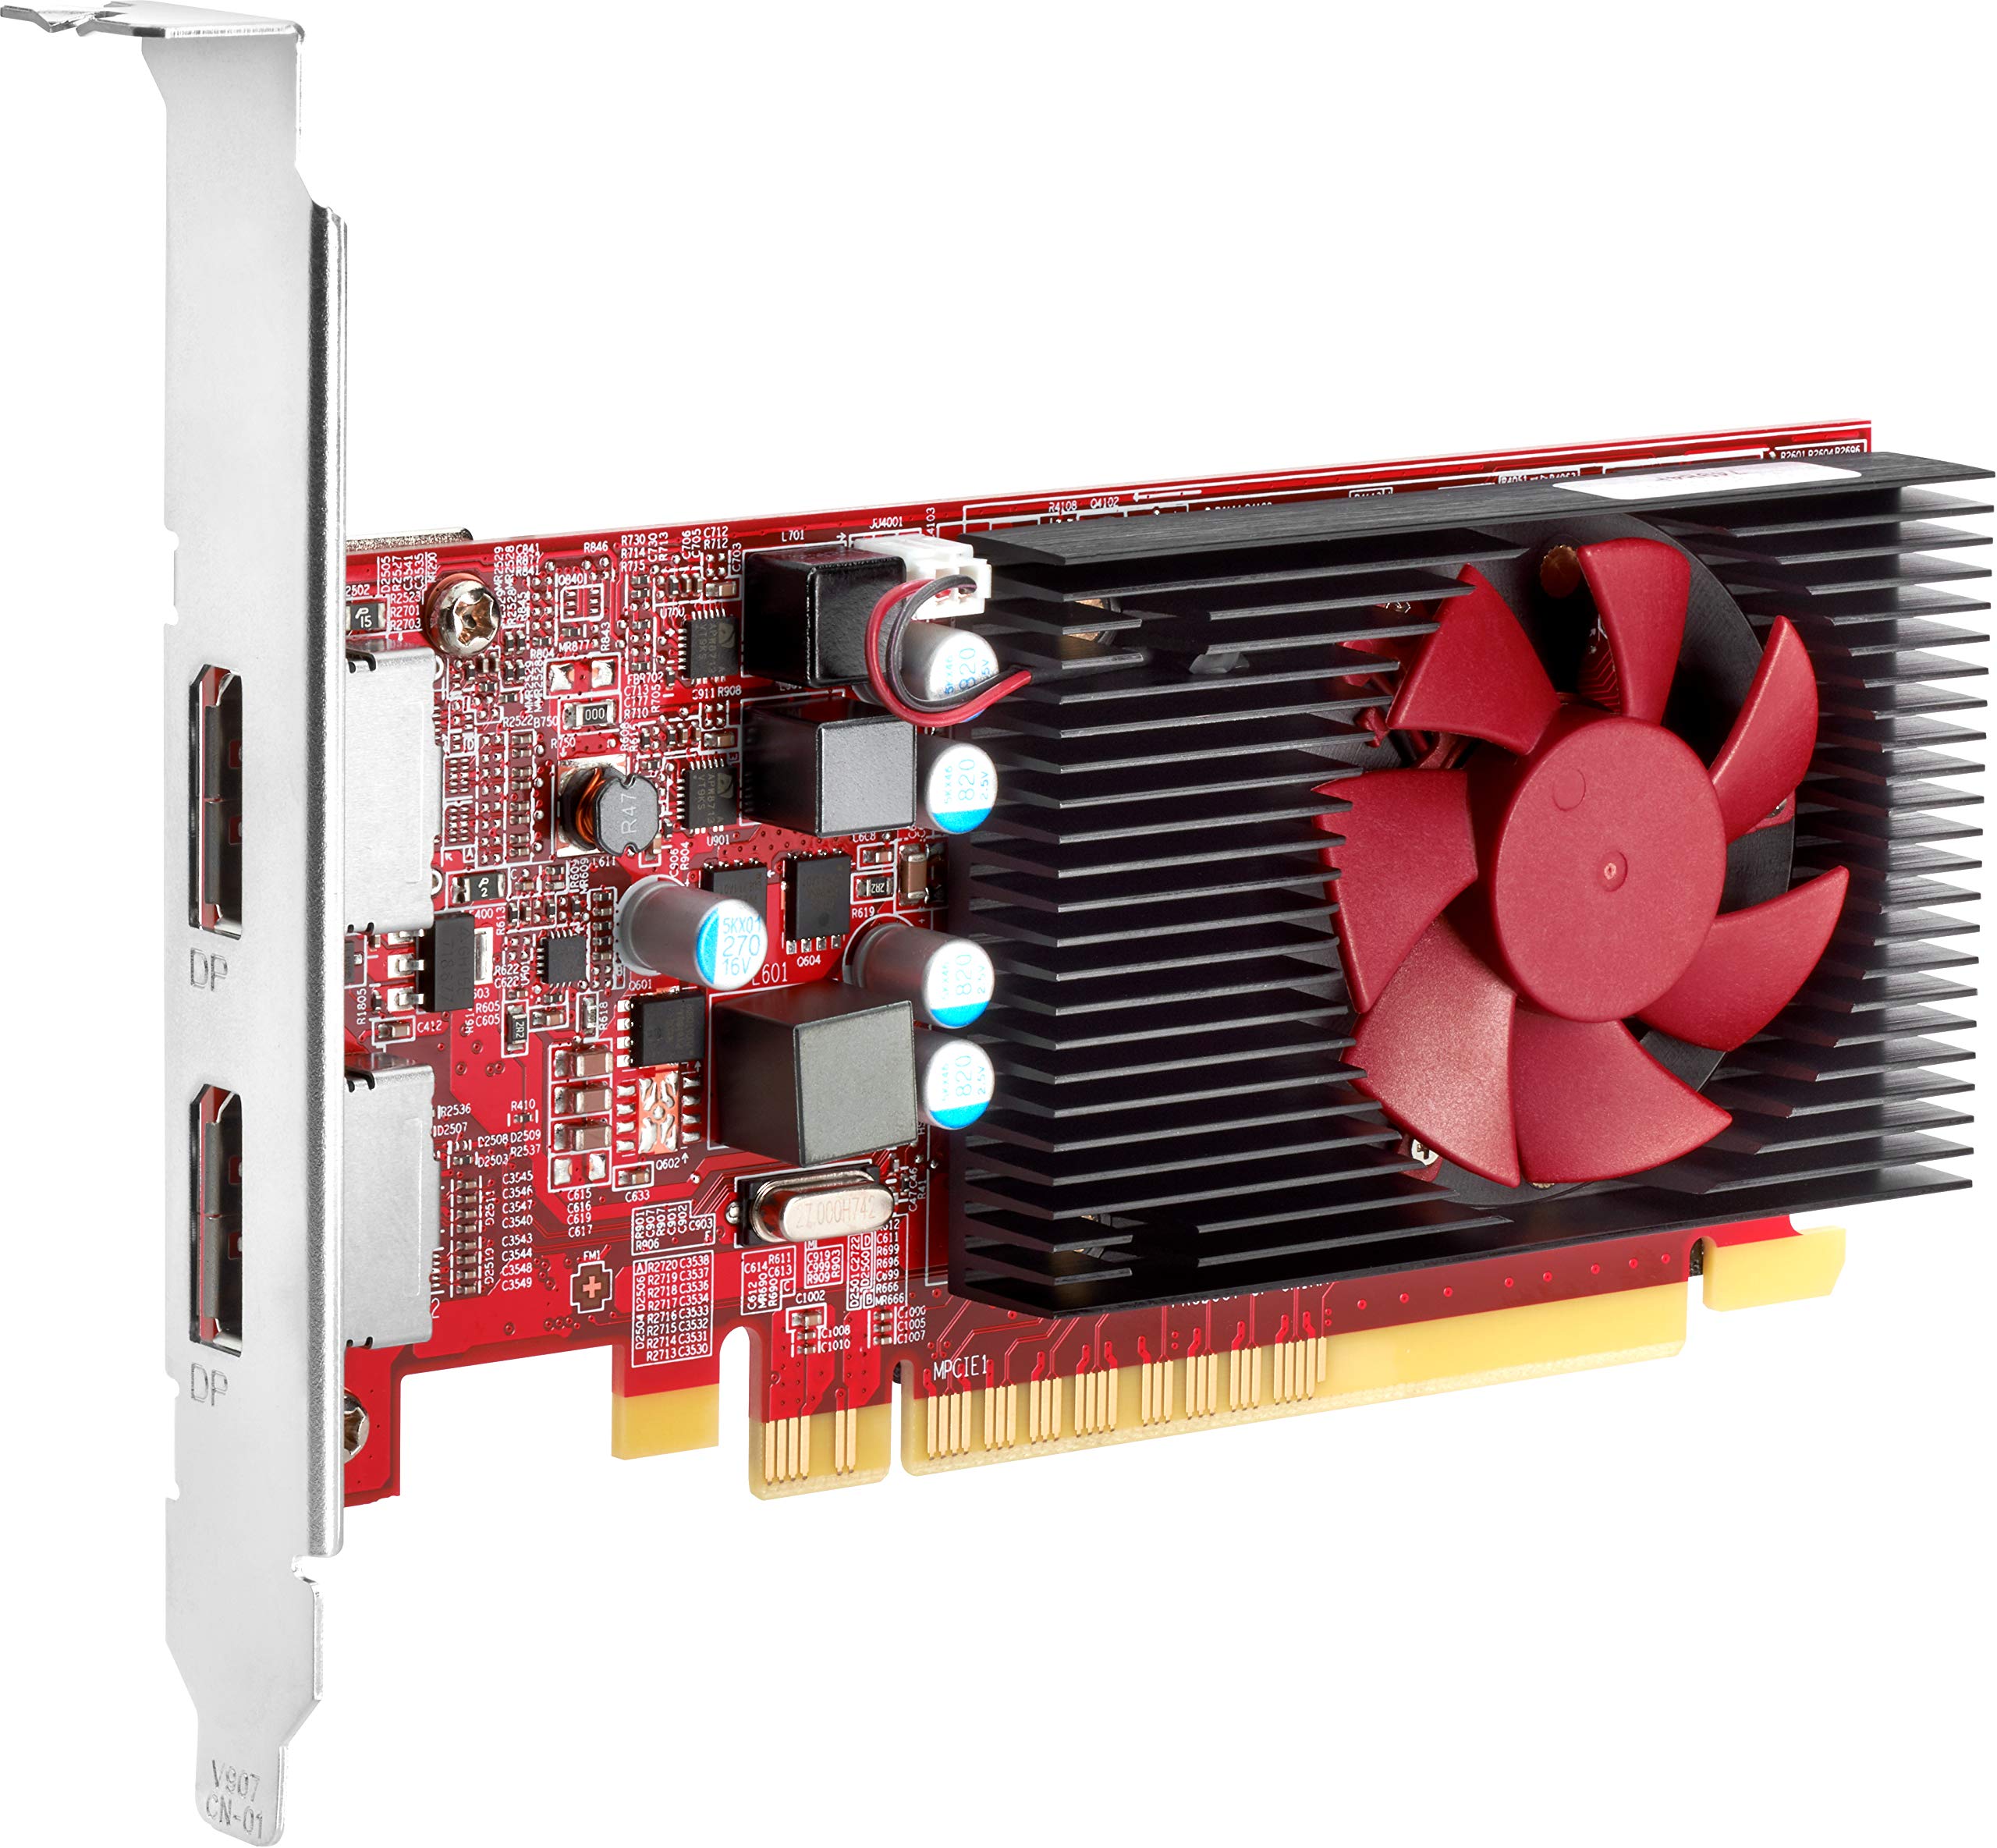 AMD Radeon R7 graphics card with a red exclamation mark icon